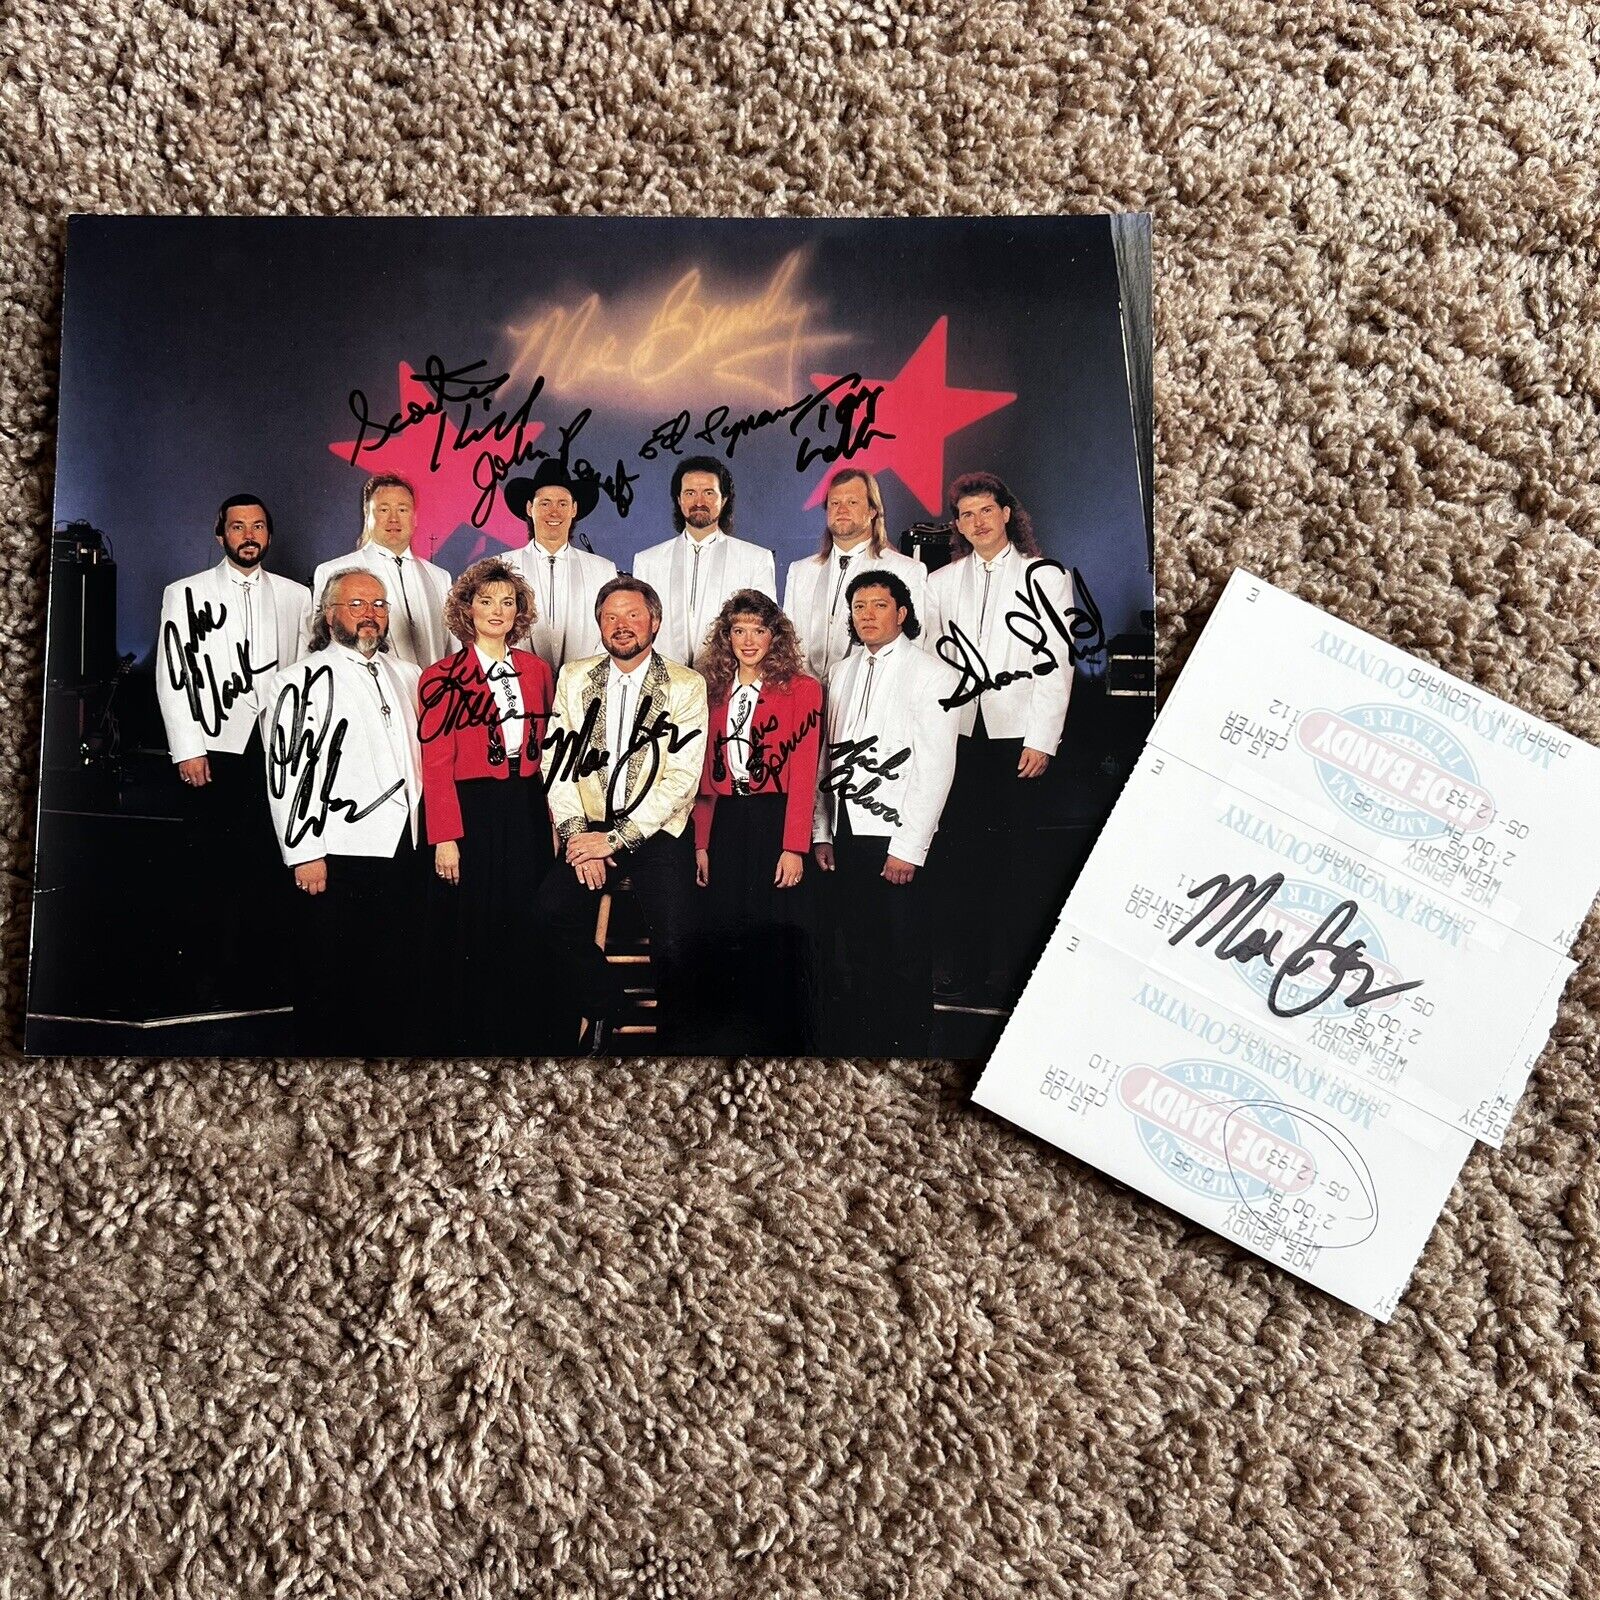 Moe Bandy Full Band & Tickets Autograph signed 8.5x11 photo Country Music 1993